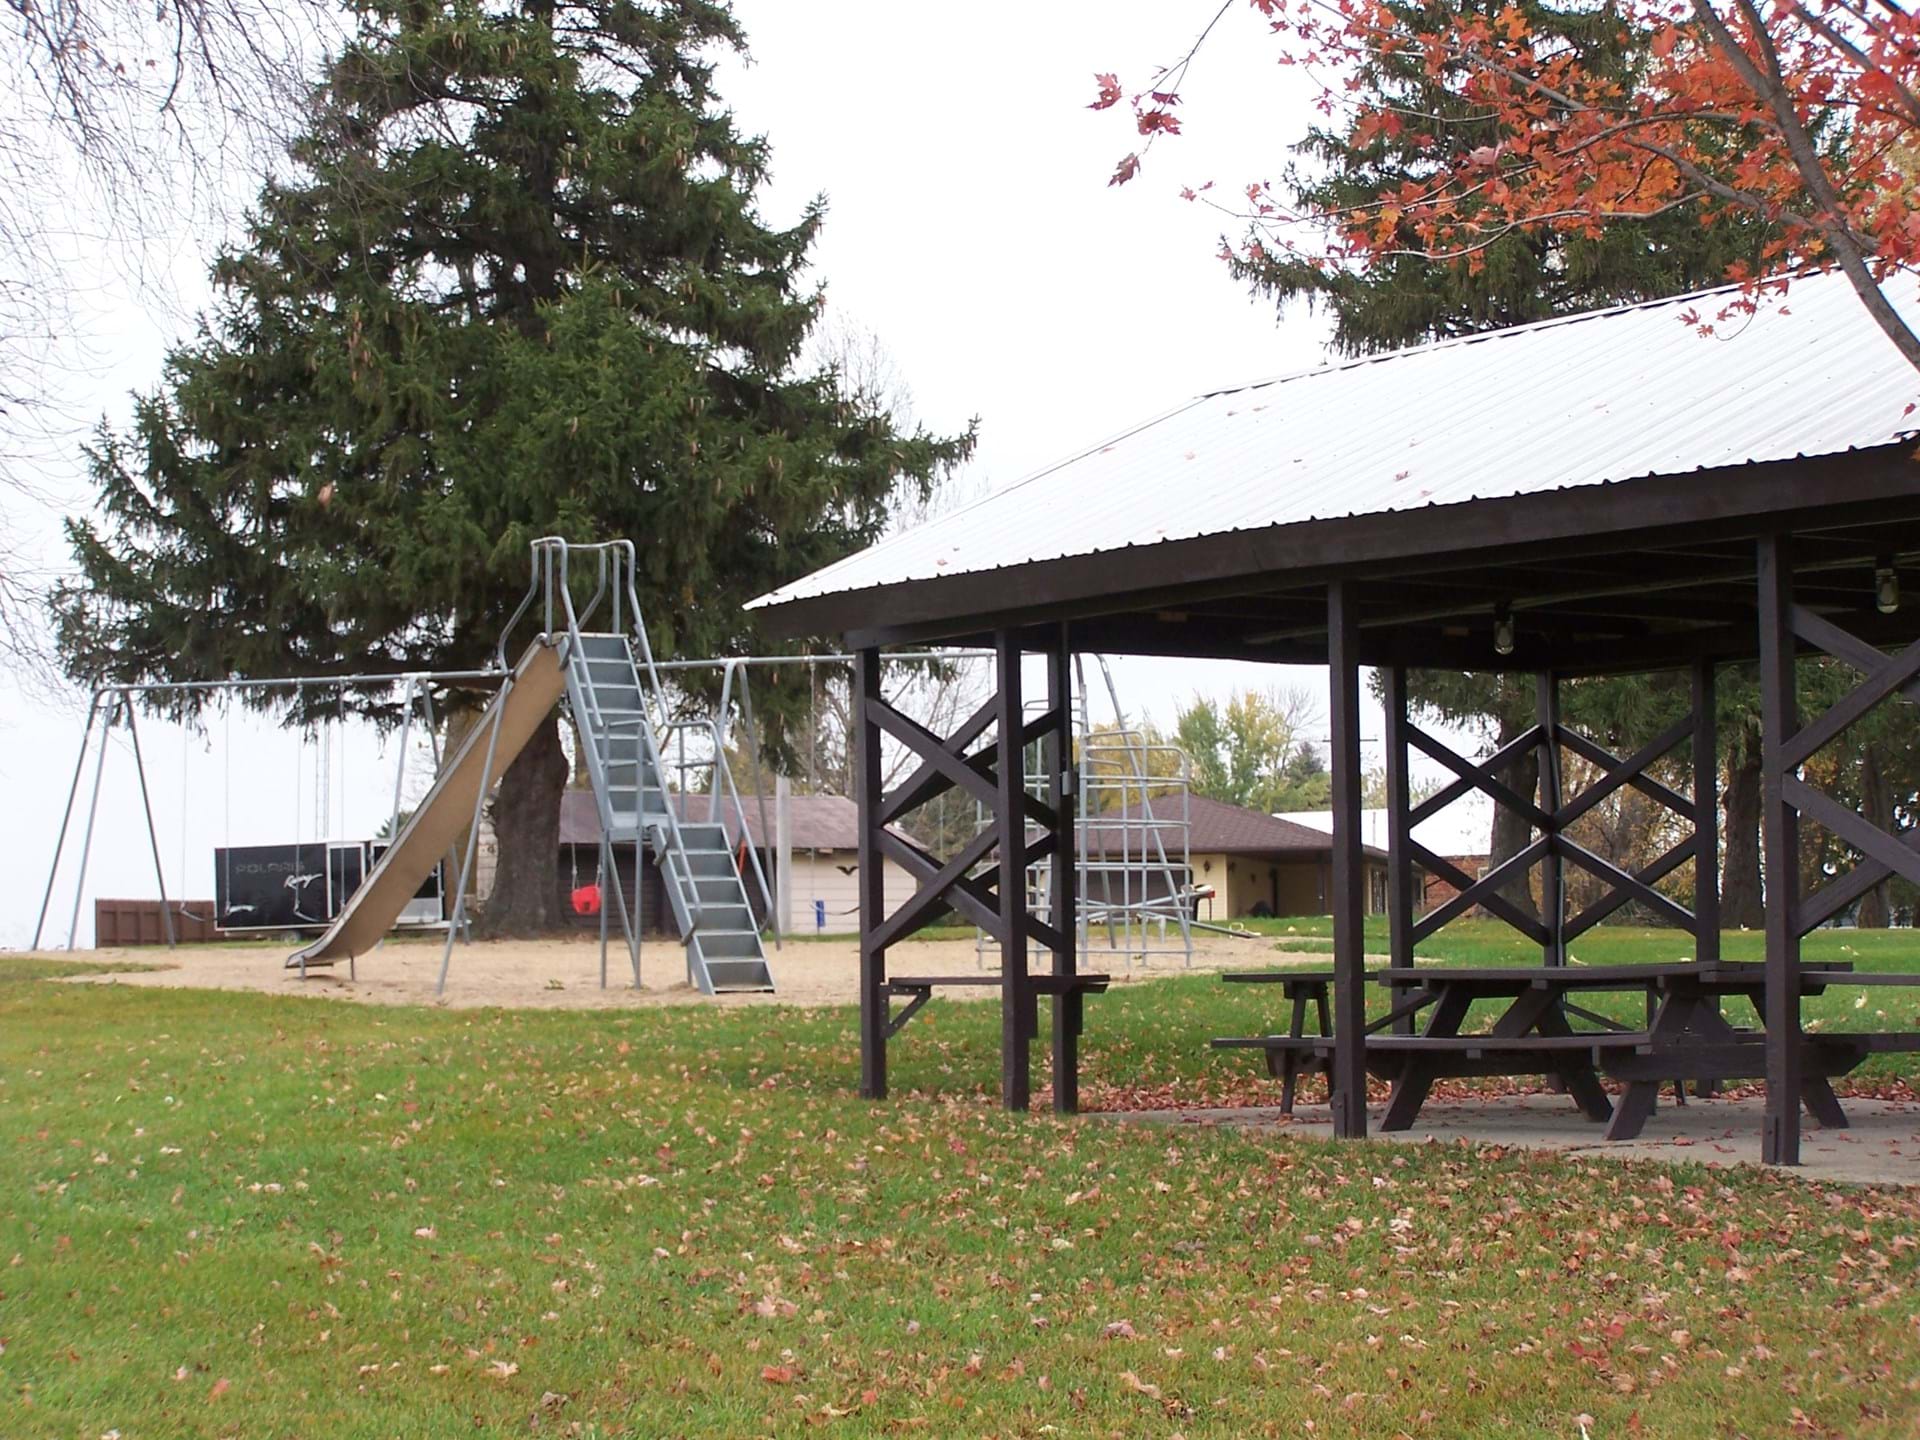 A view of the playground and picnic shelter at Frankville Park